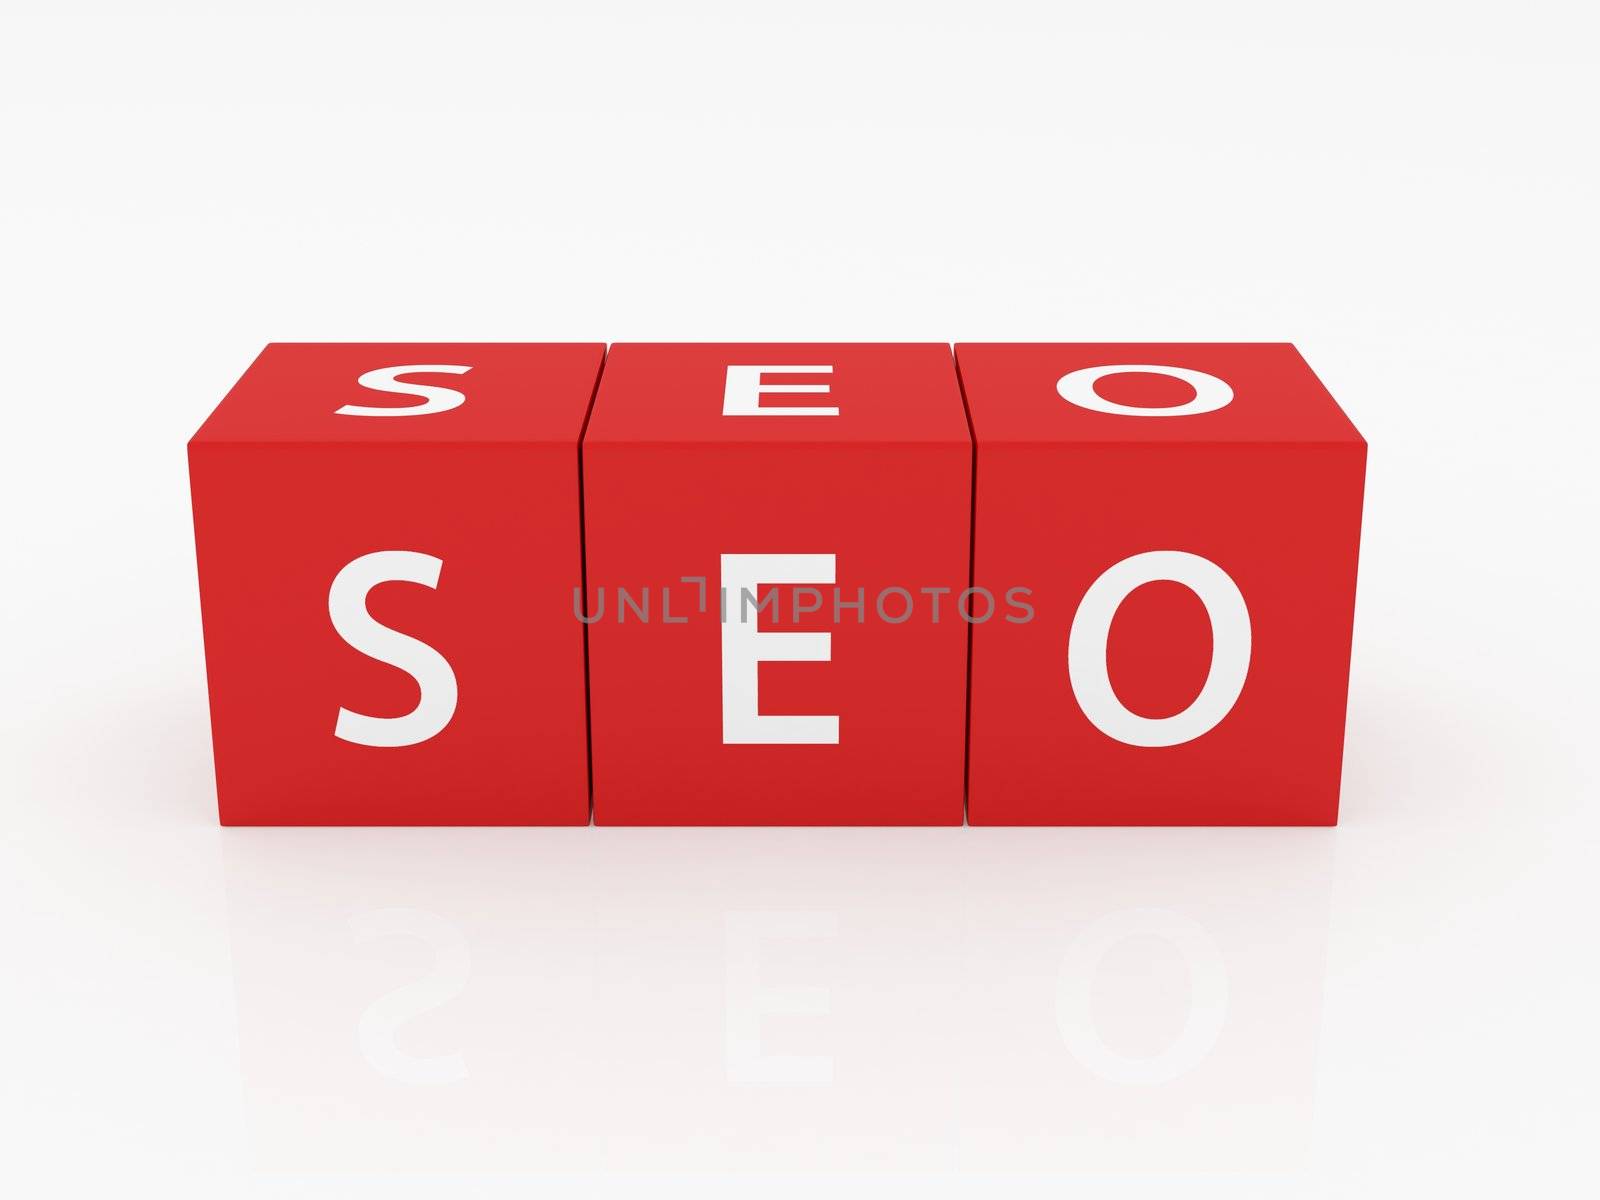 Seo blocks on dices and white background.